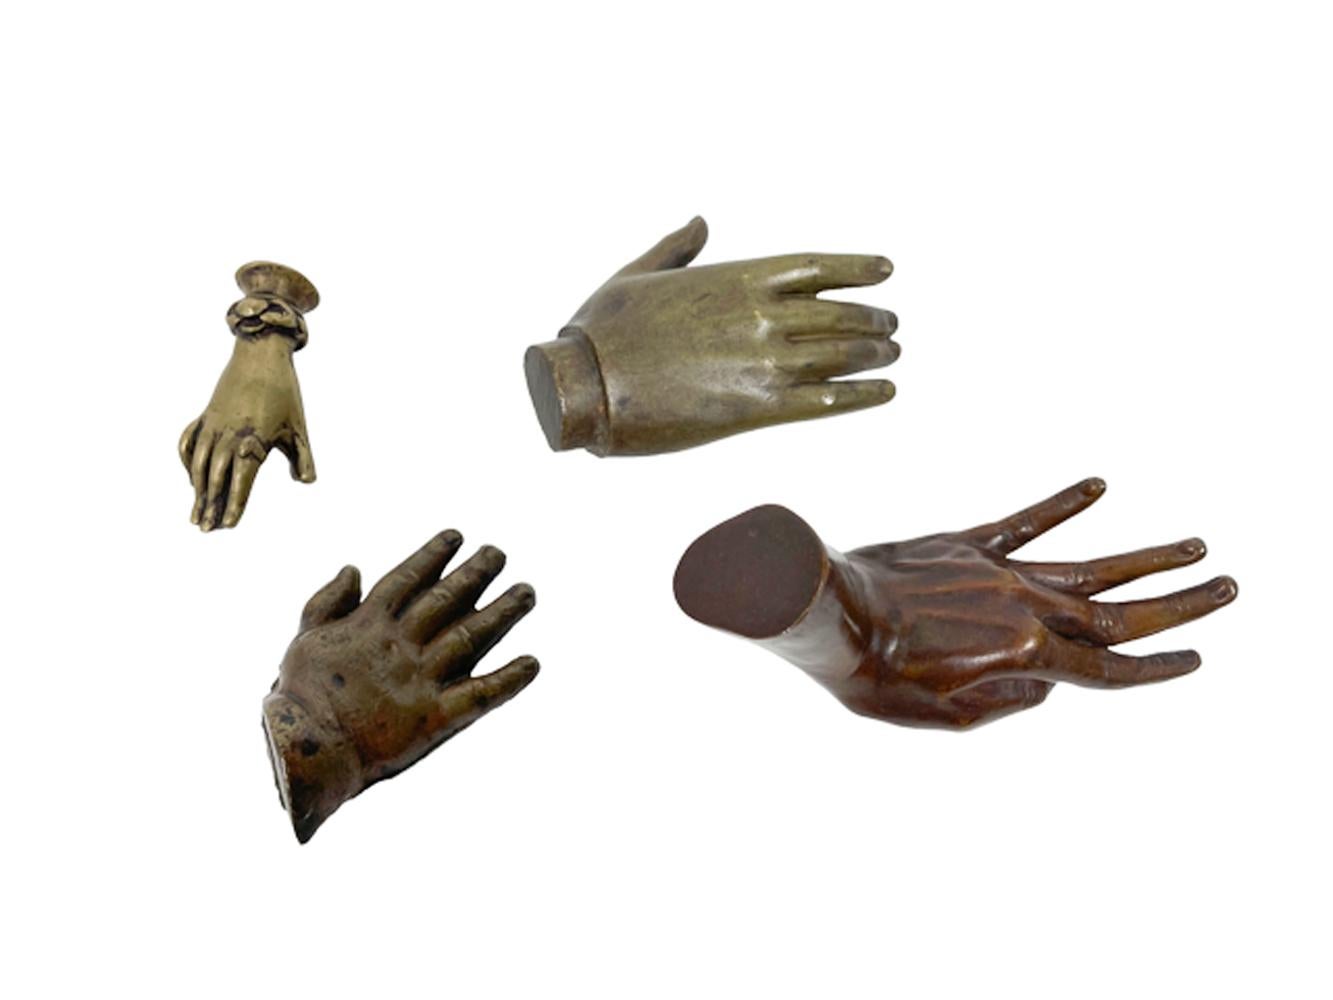 Group of late nineteenth through early twentieth century realistic cast brass and bronze models of hands, one with a ring and bracelet. 
Measurements:
2.5